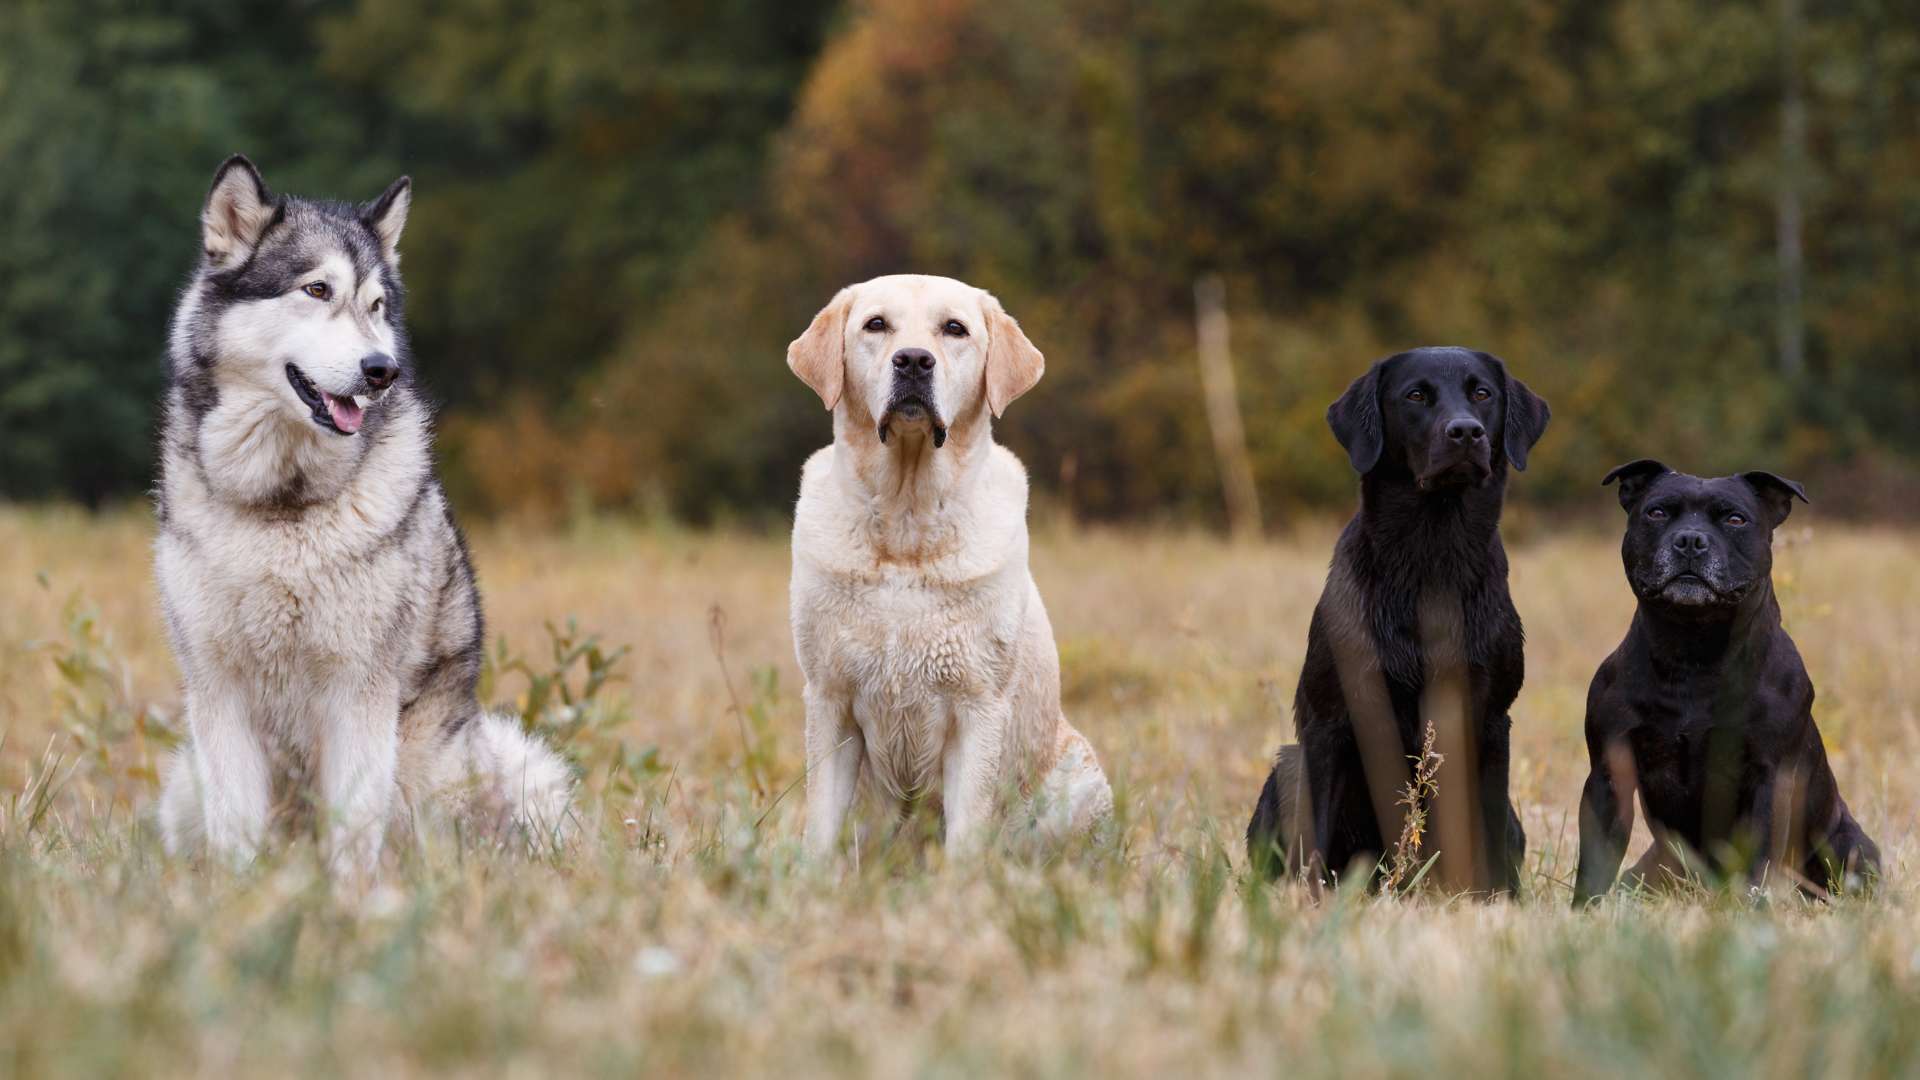 Discovering Beautiful Rare Dog Breeds: Resilience, Care, and Conservation Efforts